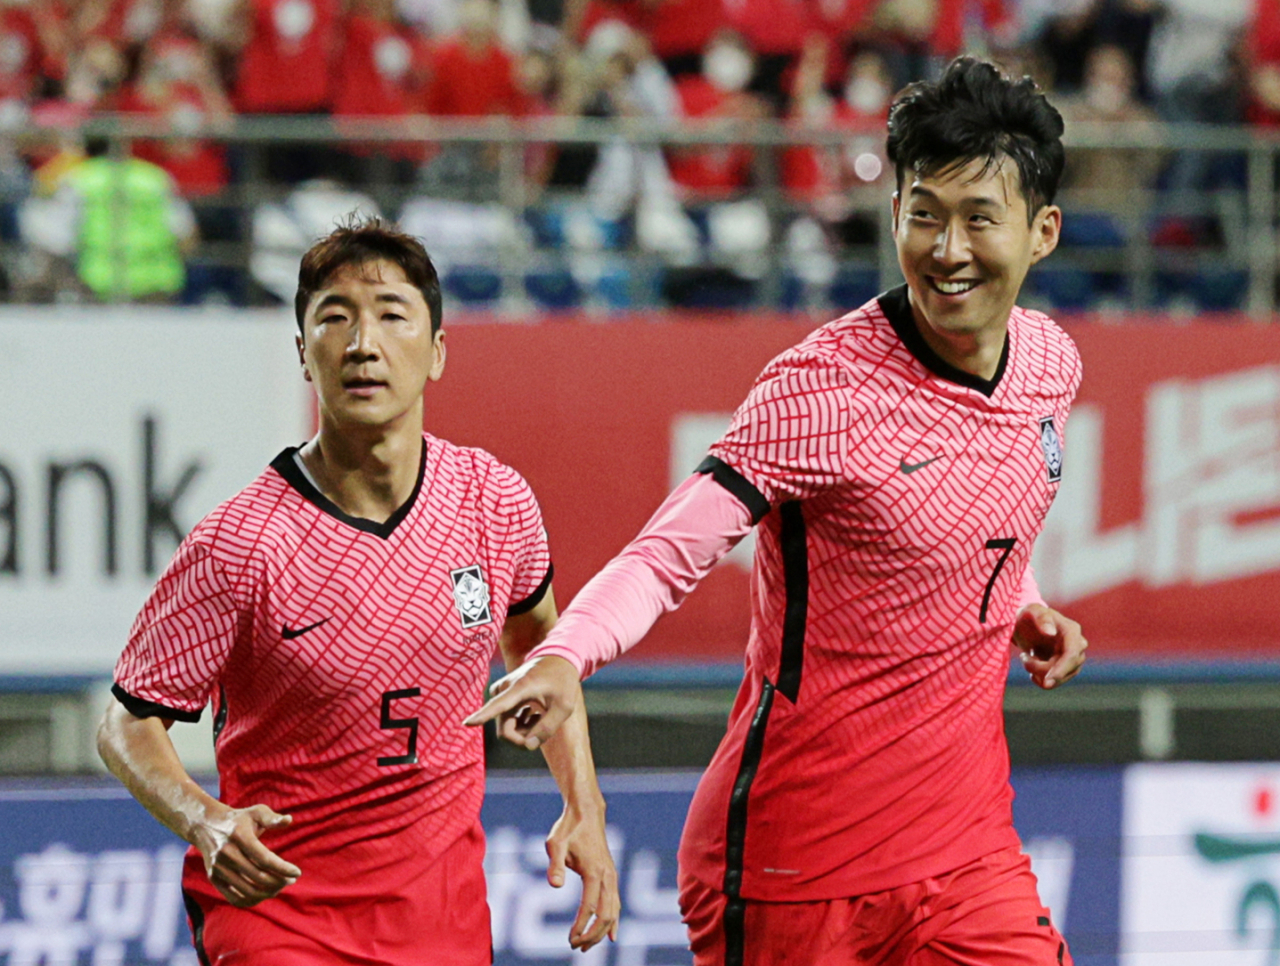 Son Heung-min of South Korea (R) celebrates after scoring a goal against Chile during the countries' football friendly match at Daejeon World Cup Stadium in Daejeon, some 160 kilometers south of Seoul, on Monday. (Yonhap)